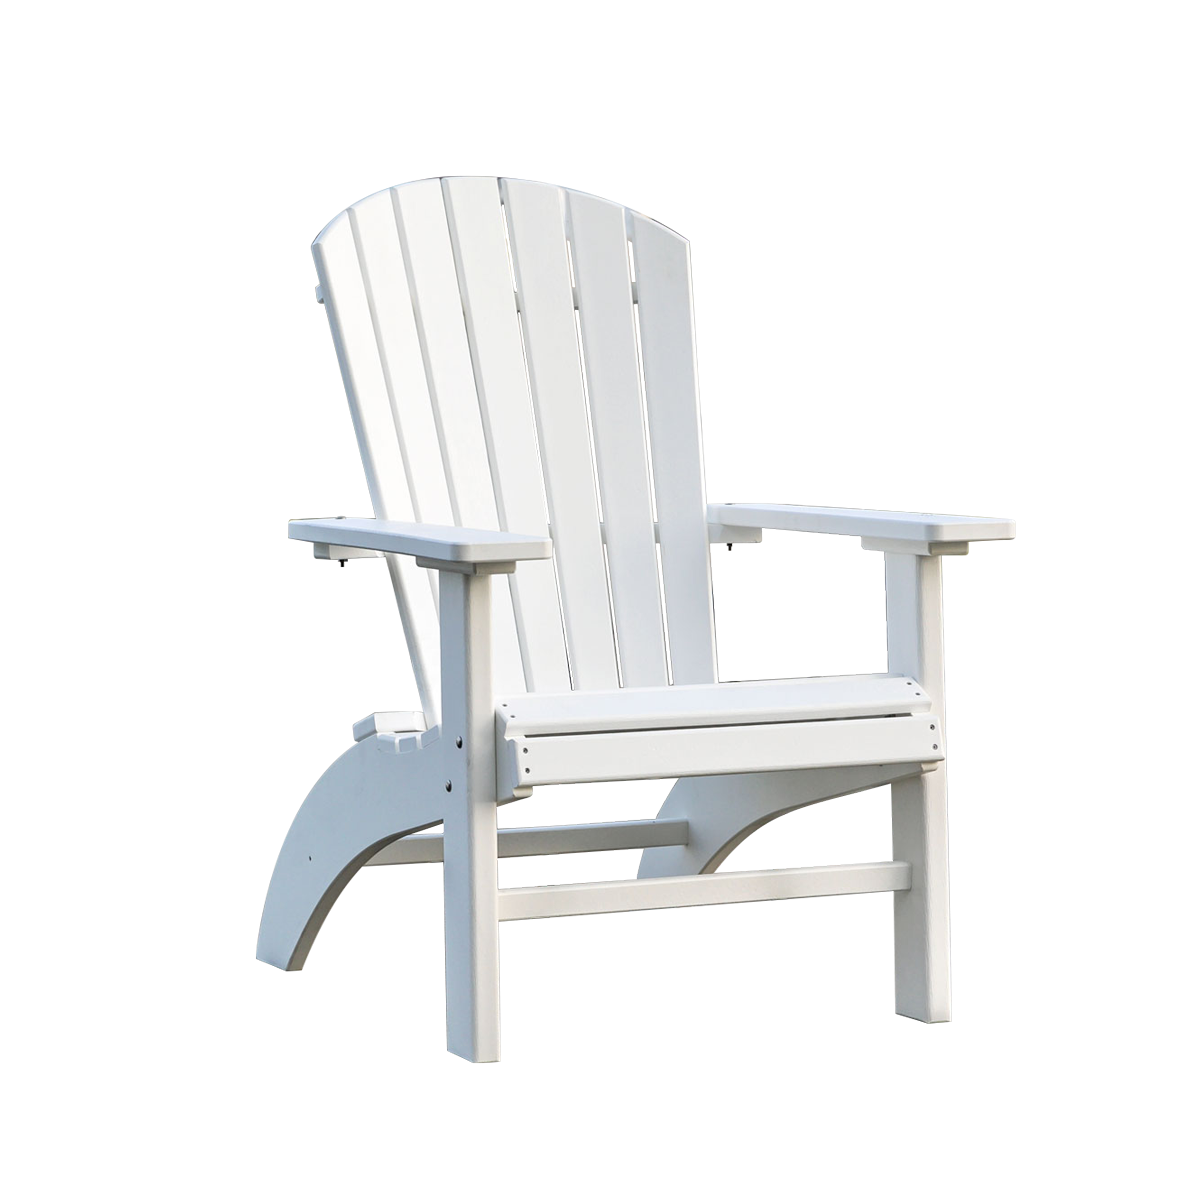 Leisure Lawns Amish MadePoly Fan-Back Deluxe Upright Adirondack Chair with Elevated Seat Height Model #380 - LEAD TIME TO SHIP 6 WEEKS OR LESS